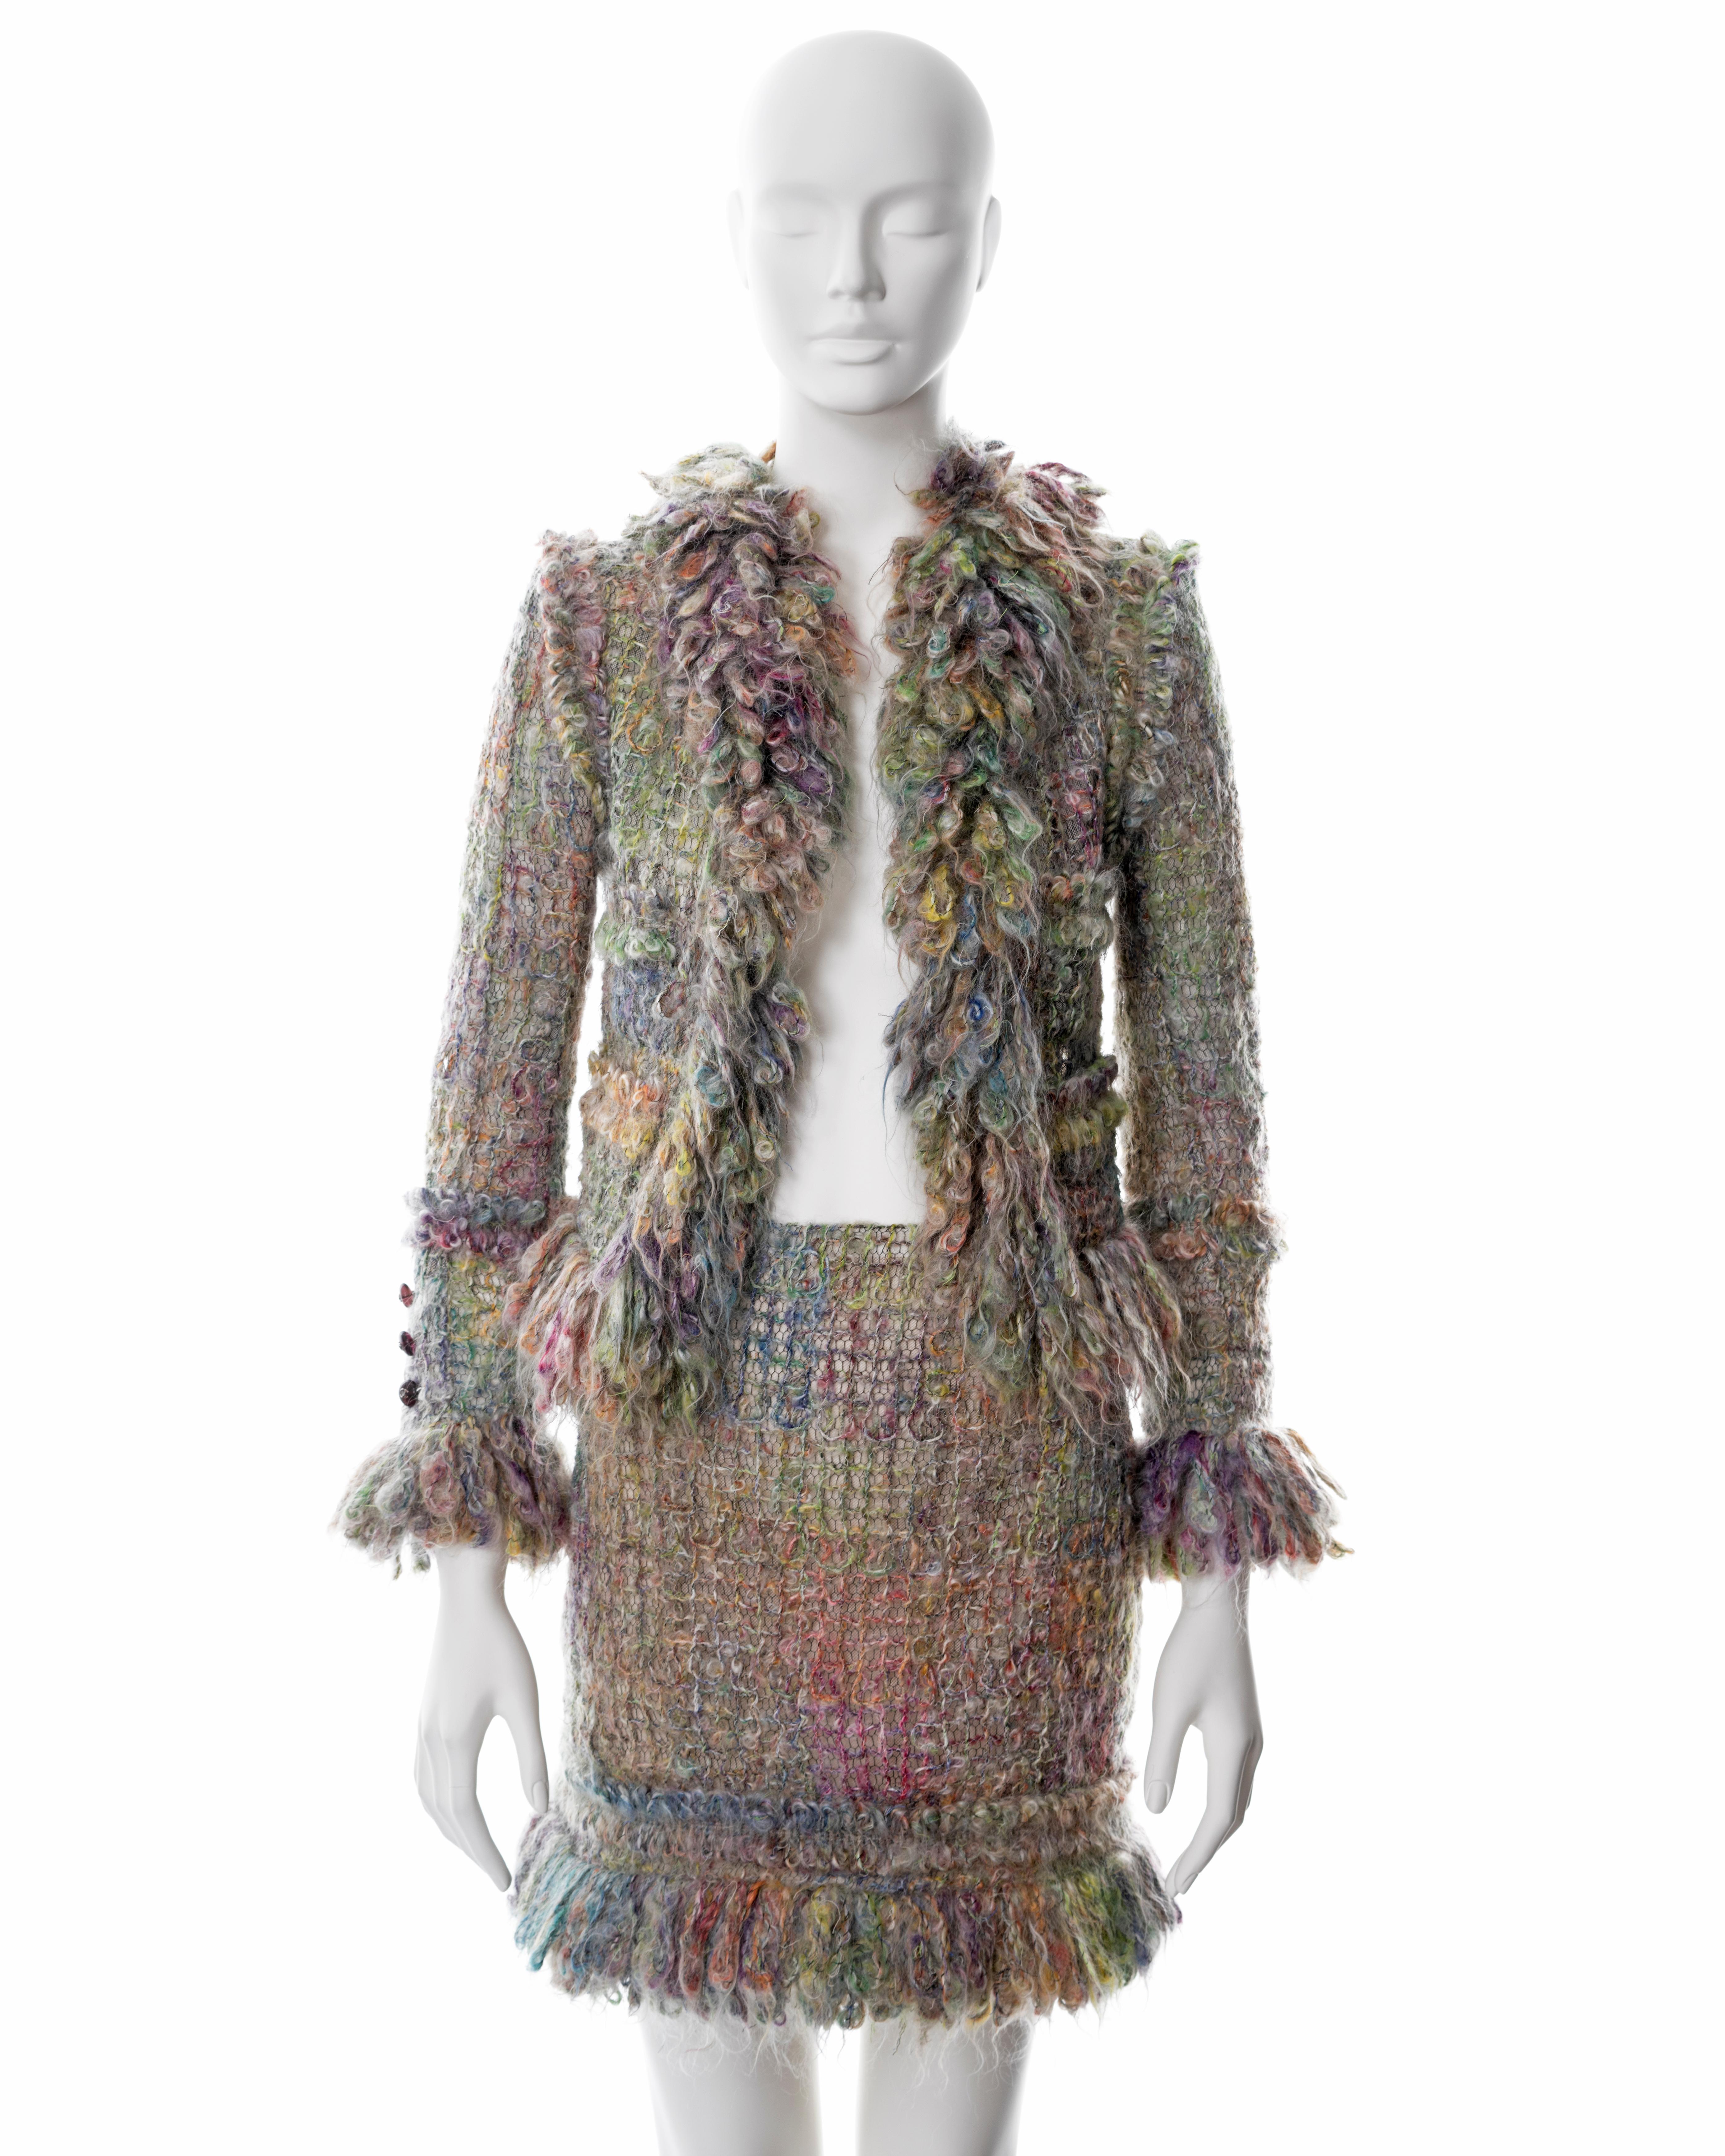 ▪ Chanel multicoloured mohair skirt suit 
▪ Designed by Karl Lagerfeld
▪ Sold by One of a Kind 
▪ Fall-Winter 2003
▪ Constructed from a lattice of mohair and net-lace in pastels of green, pink, orange, blue and yellow 
▪ Lopped fringed trim on the